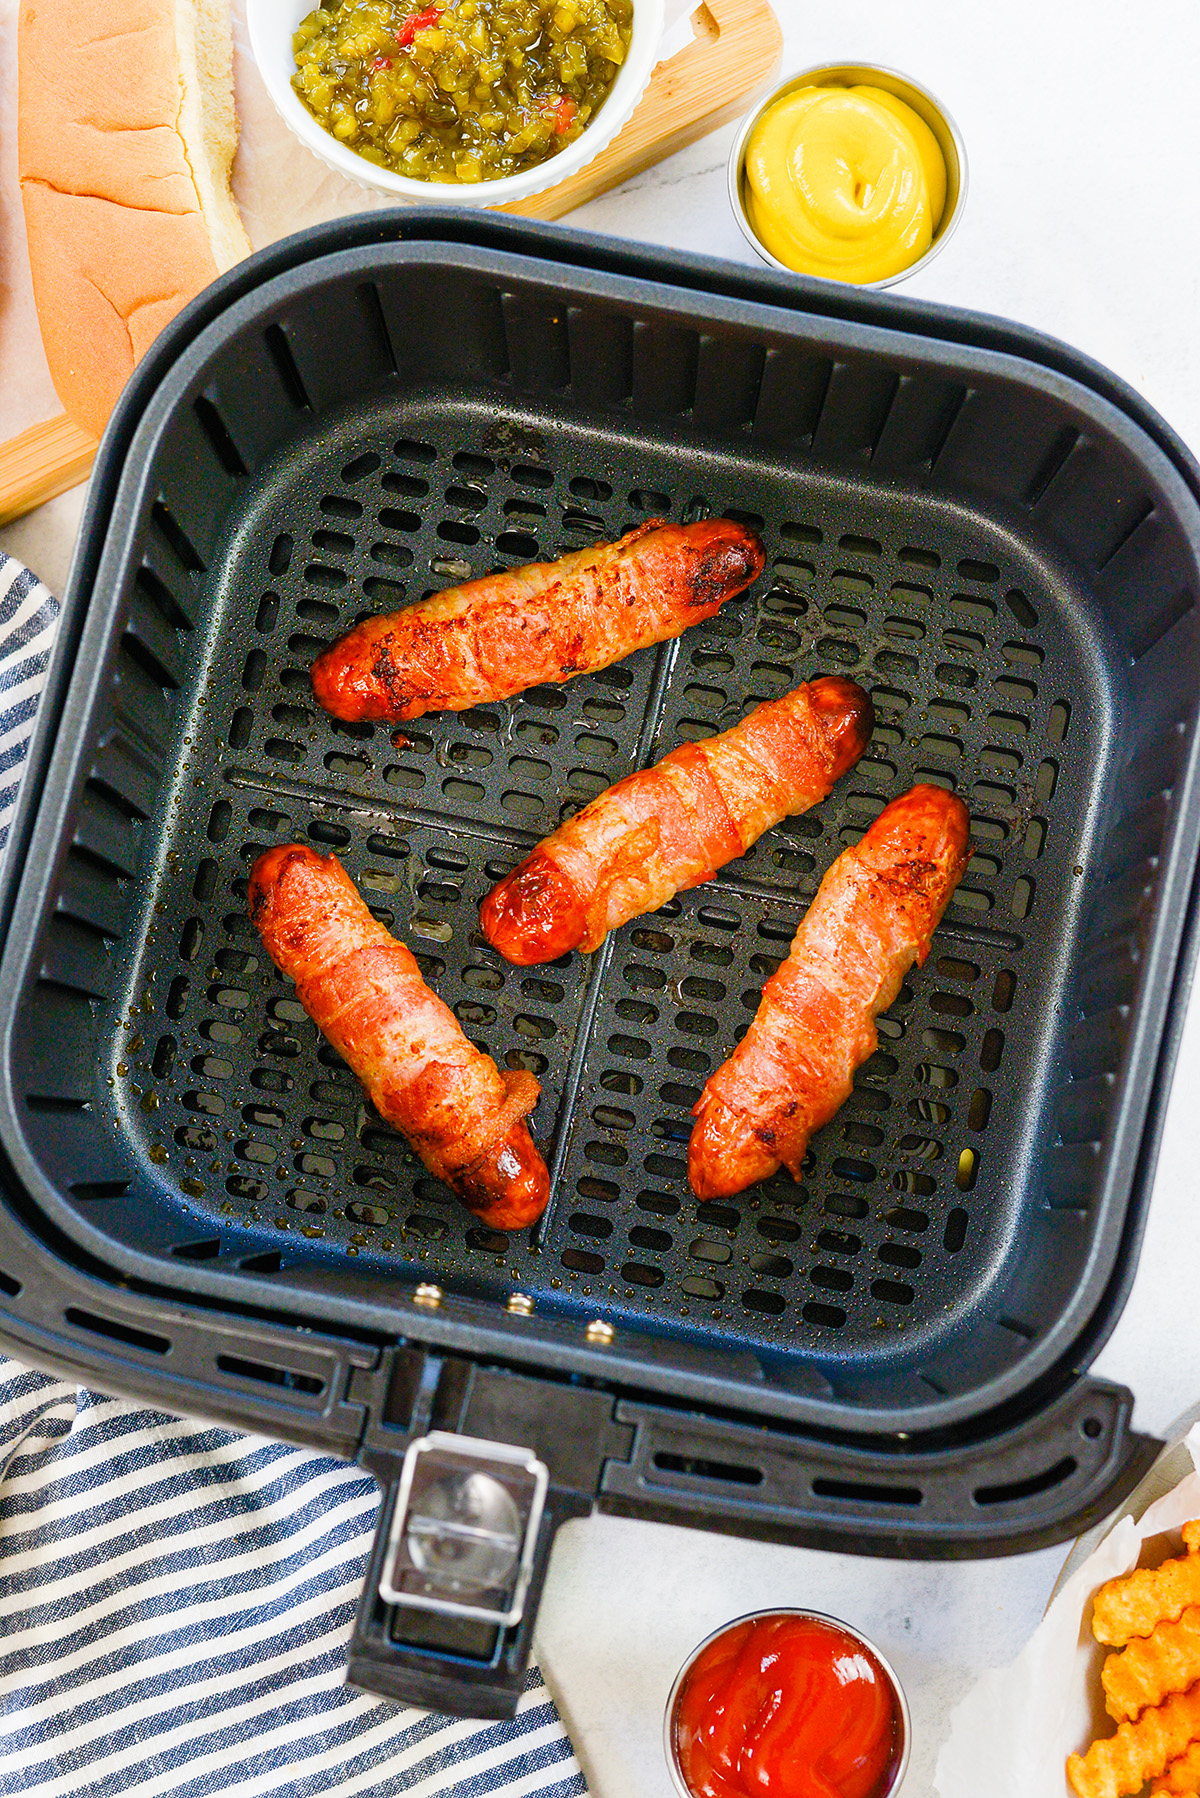 Four cooked bacon wrapped hot dogs in an air fryer basket.